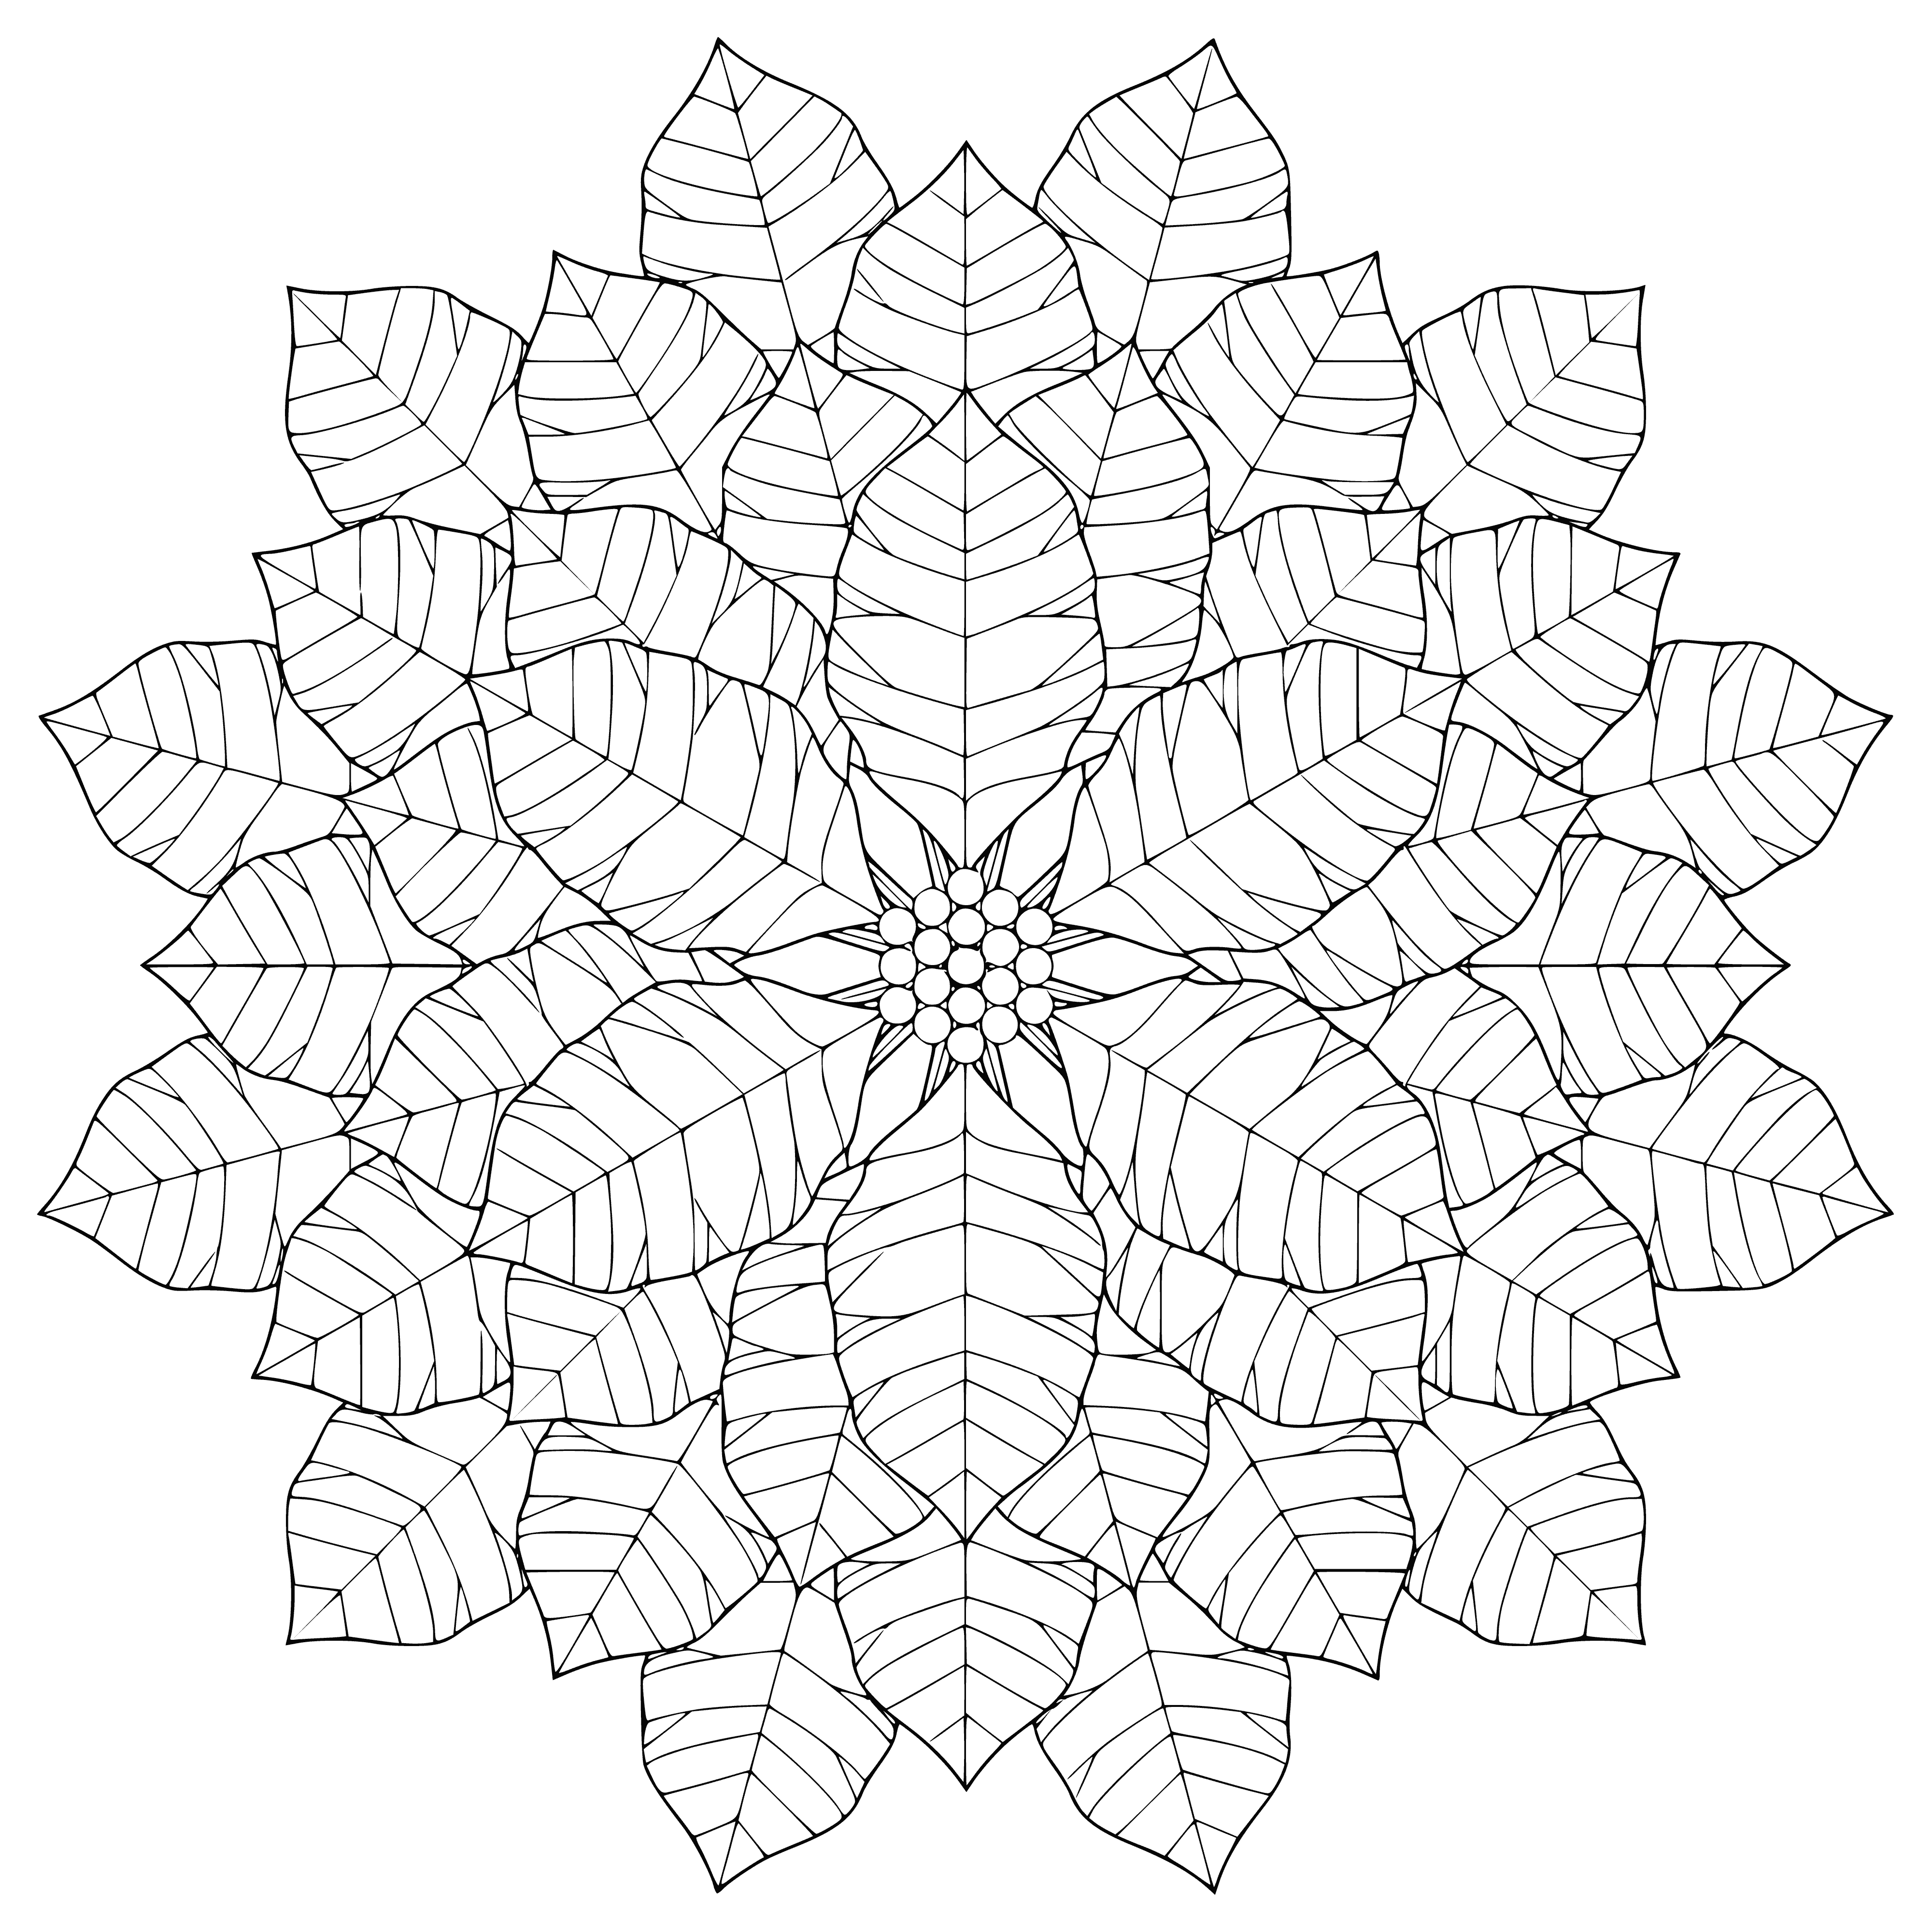 Beautiful snowflake resting on a black background w/ 6 irregular, curved arms; smooth, blemish-free surface.